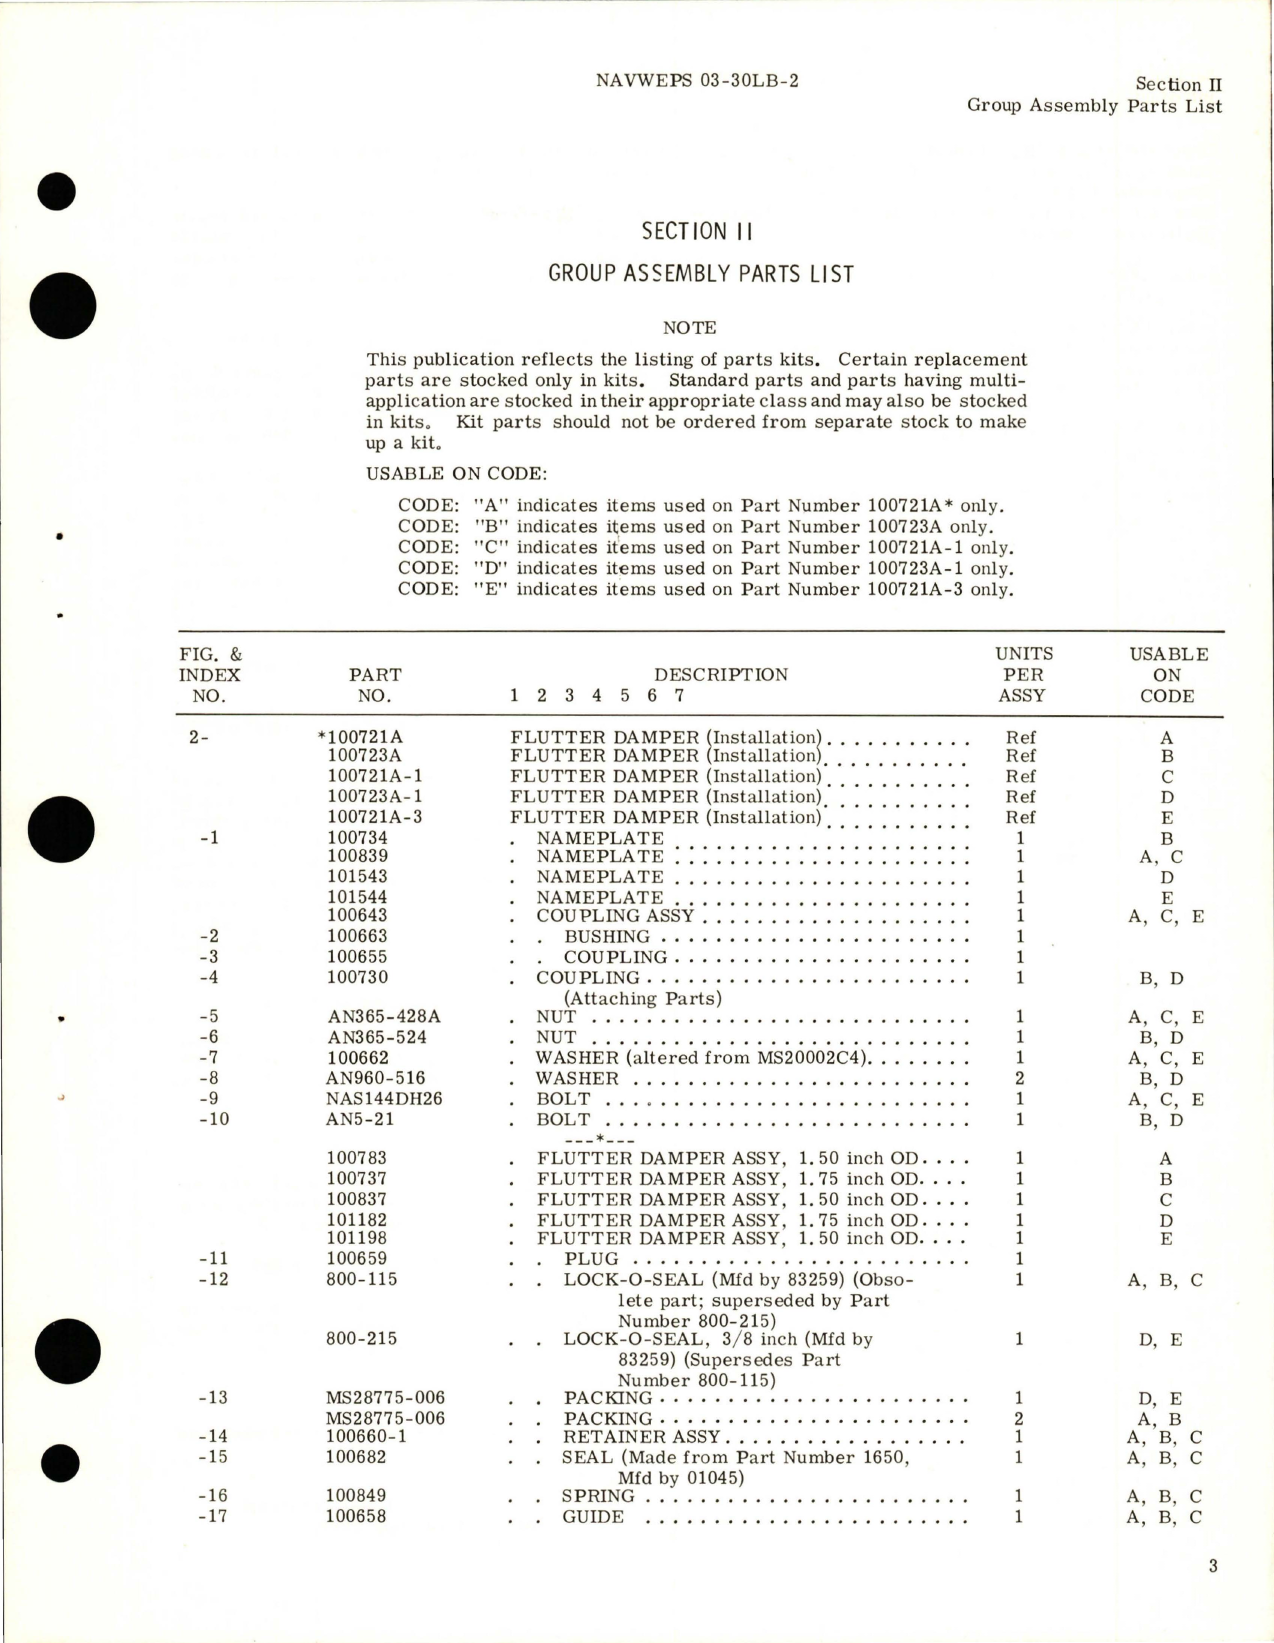 Sample page 5 from AirCorps Library document: Illustrated Parts Breakdown for Flutter Dampers - Parts 100721A, 100721A-1, 100721A-3, 100723A, and 100723A-1